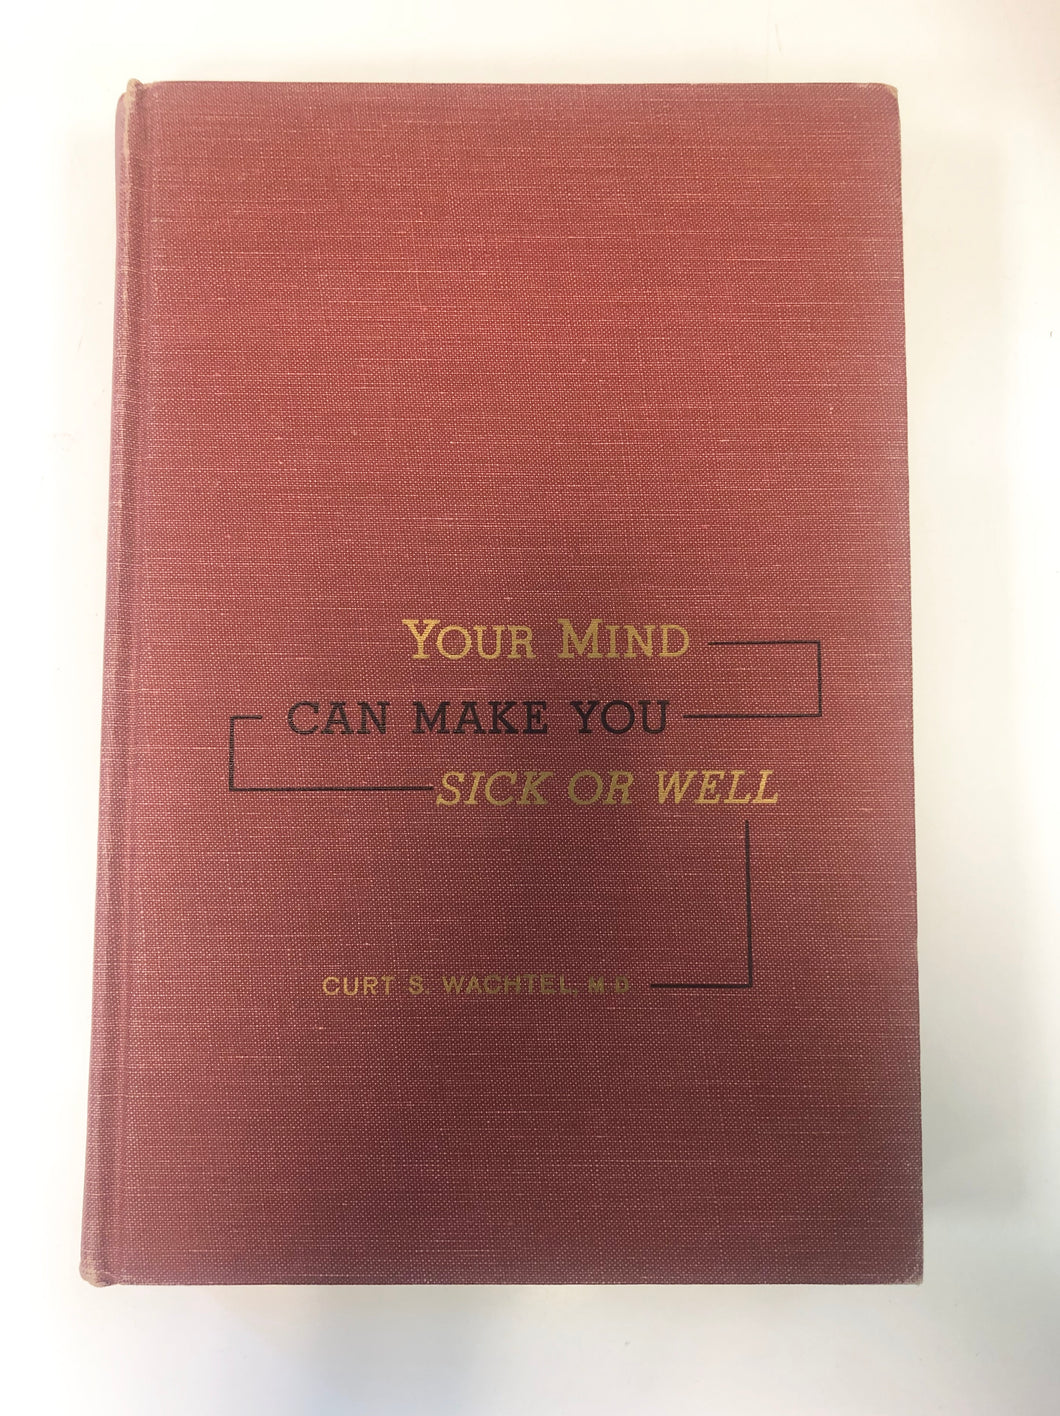 Your Mind Can Make You Sick or Well by Curt S. Wachtel